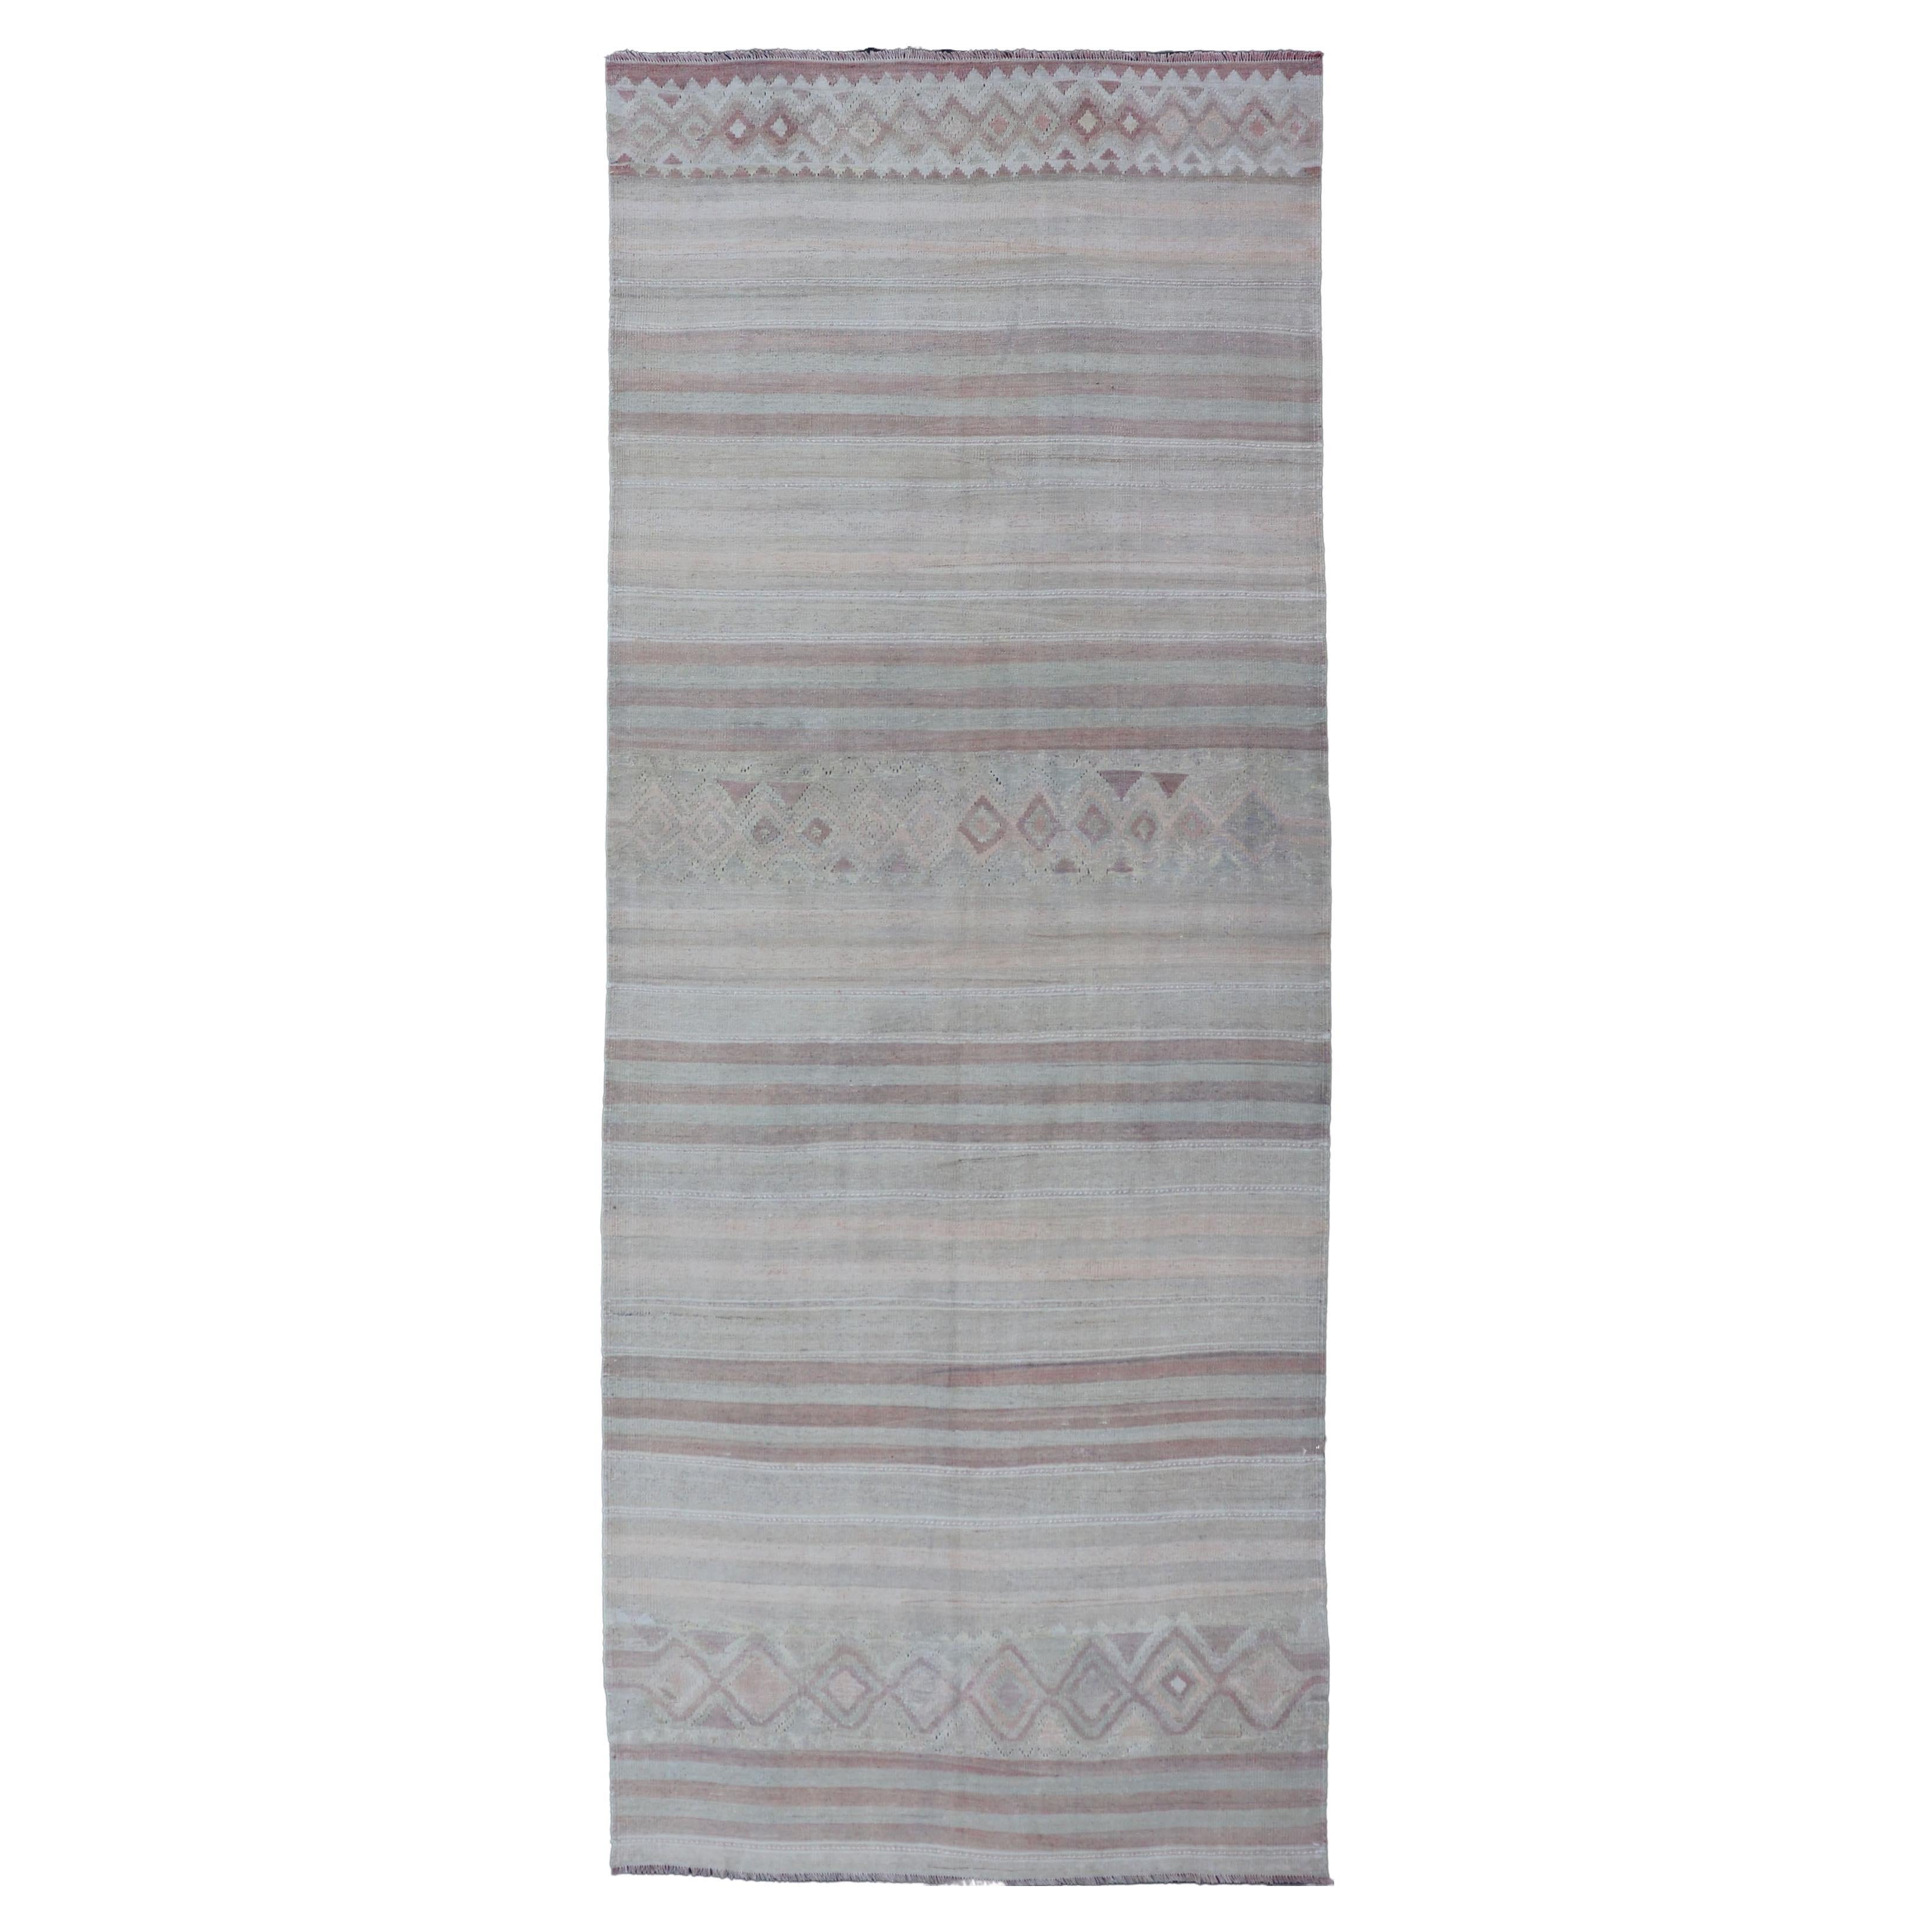  Vintage Turkish Gallery Kilim Runner with Creams, Soft Coral and Light Brown For Sale